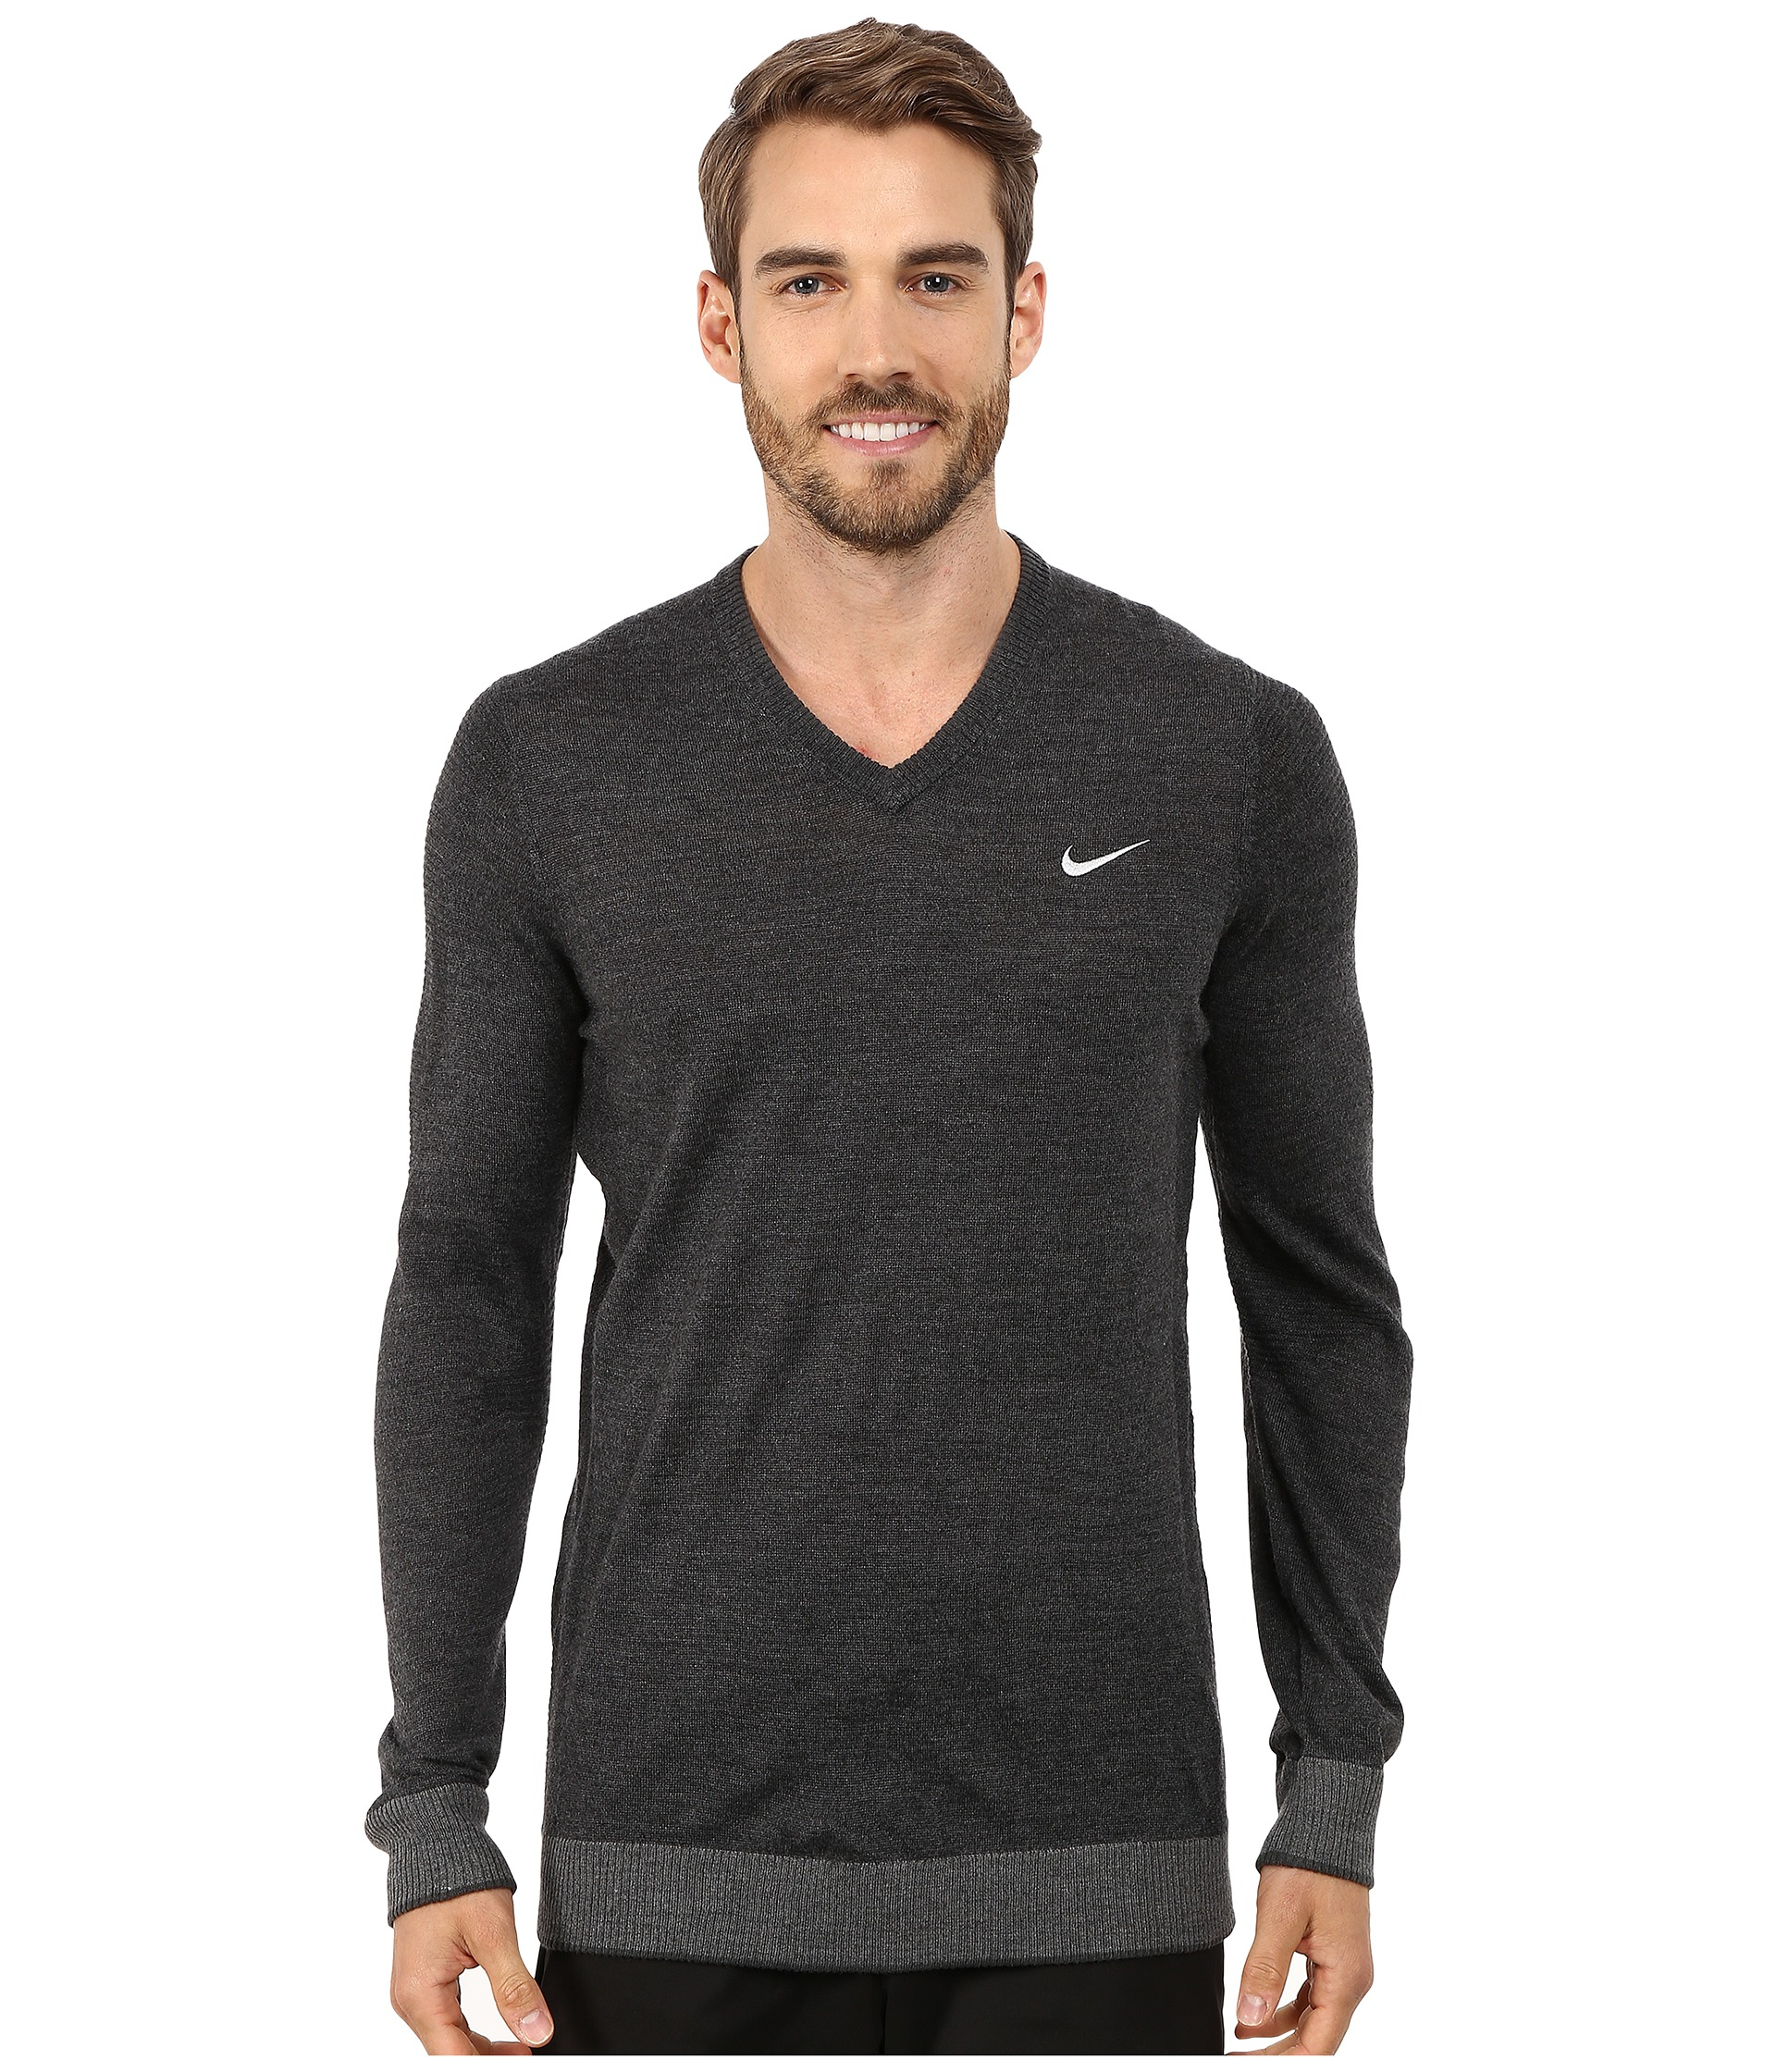 Lyst - Nike Engineered Knit 3d Sweater in Black for Men